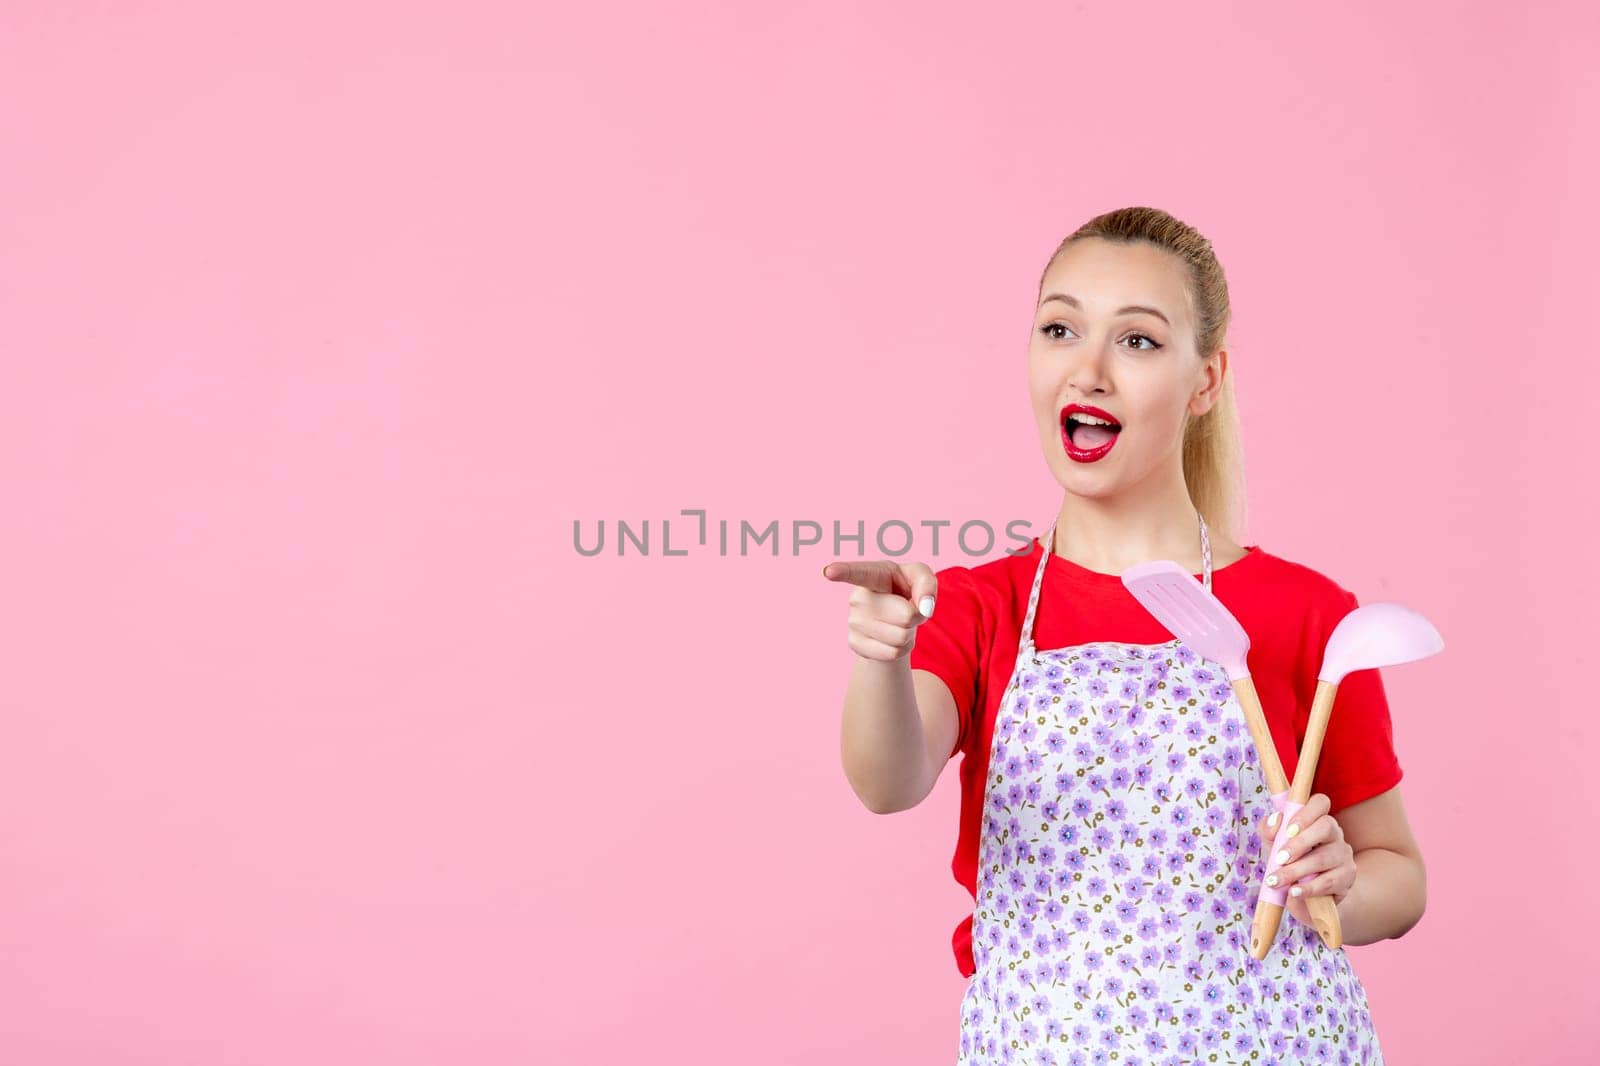 front view young housewife in cape holding spoons and interacting with someone on pink background profession cutlery occupation duty uniform job worker wife by Kamran